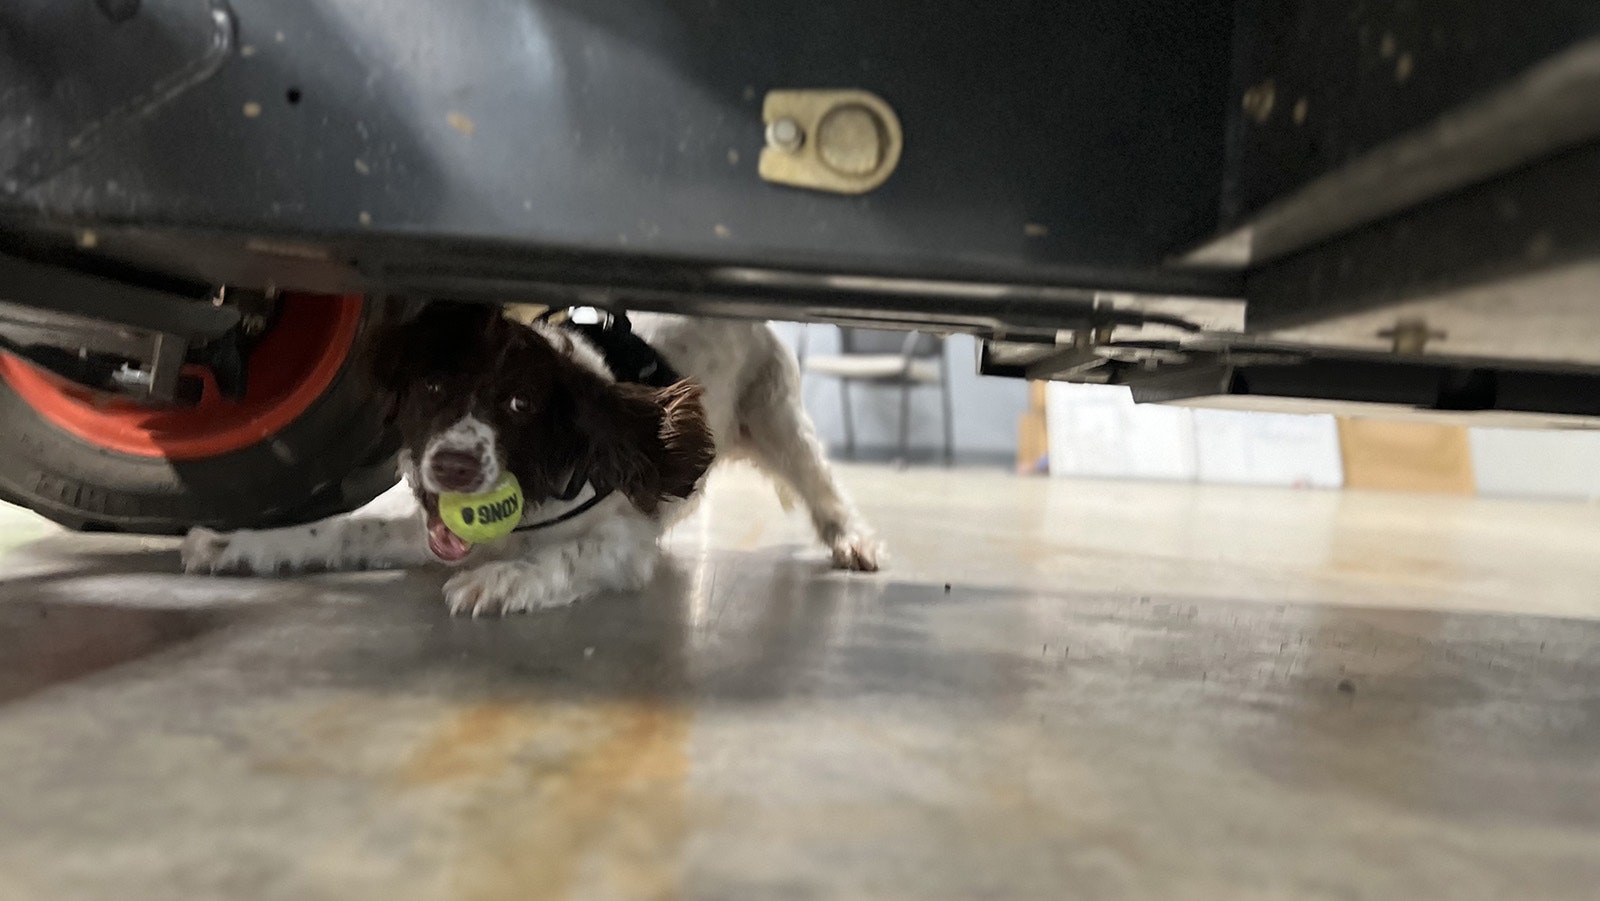 Becky goes through a training exercise Monday. While training, she's rewarded for sniffing out contraband with her favorite toy, a tennis ball.